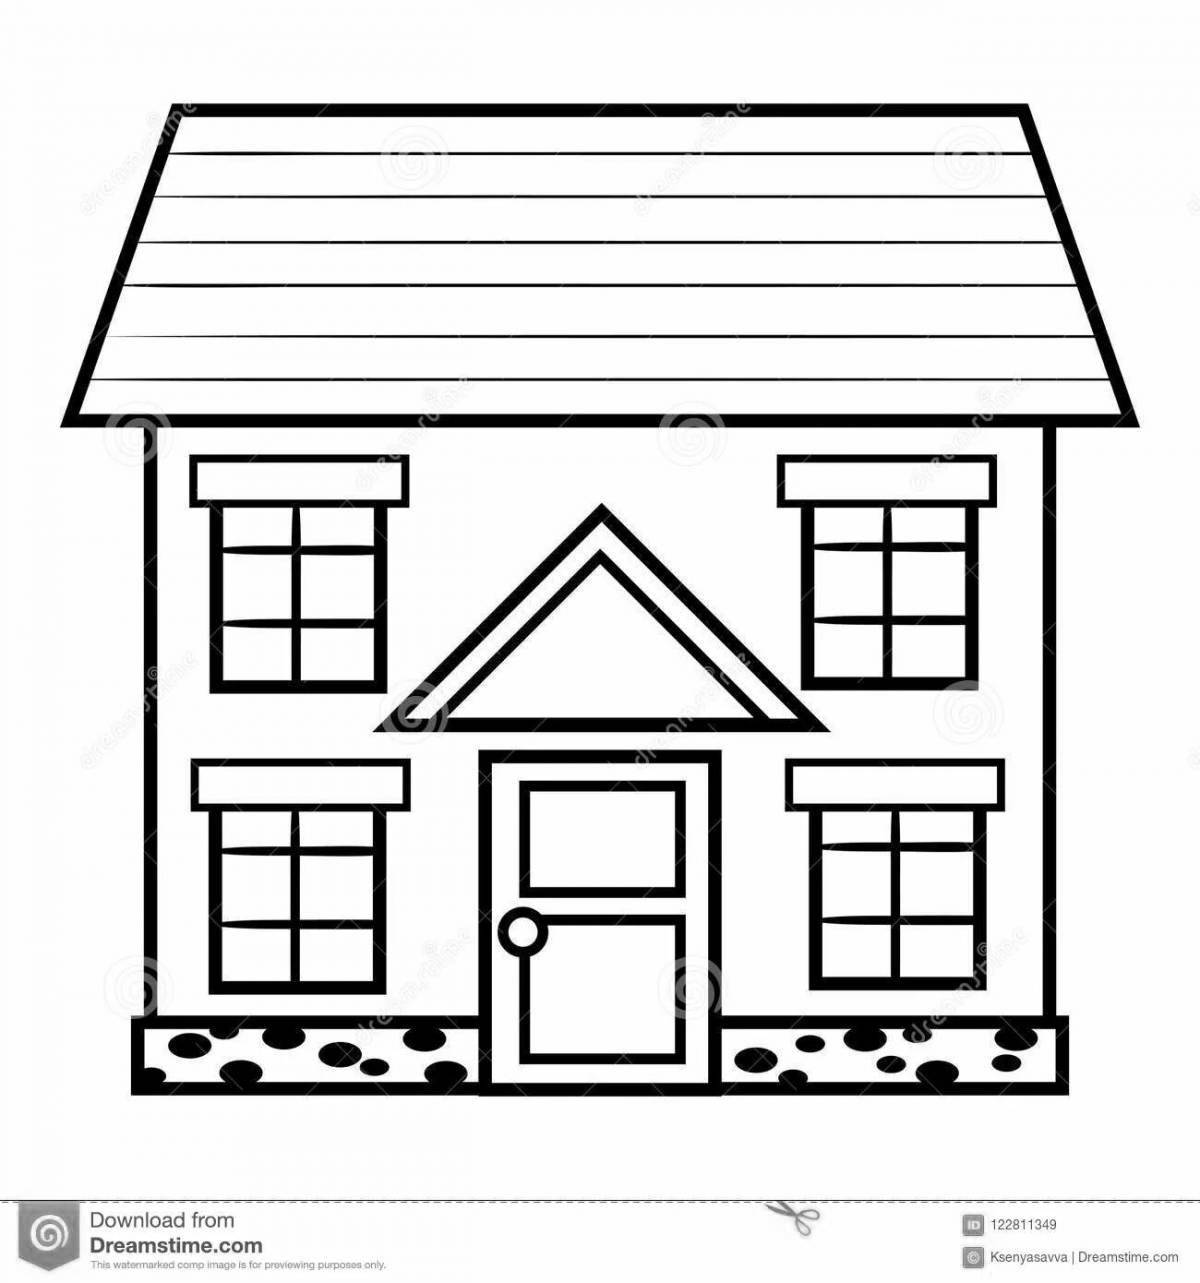 Gorgeous two story house coloring book for kids